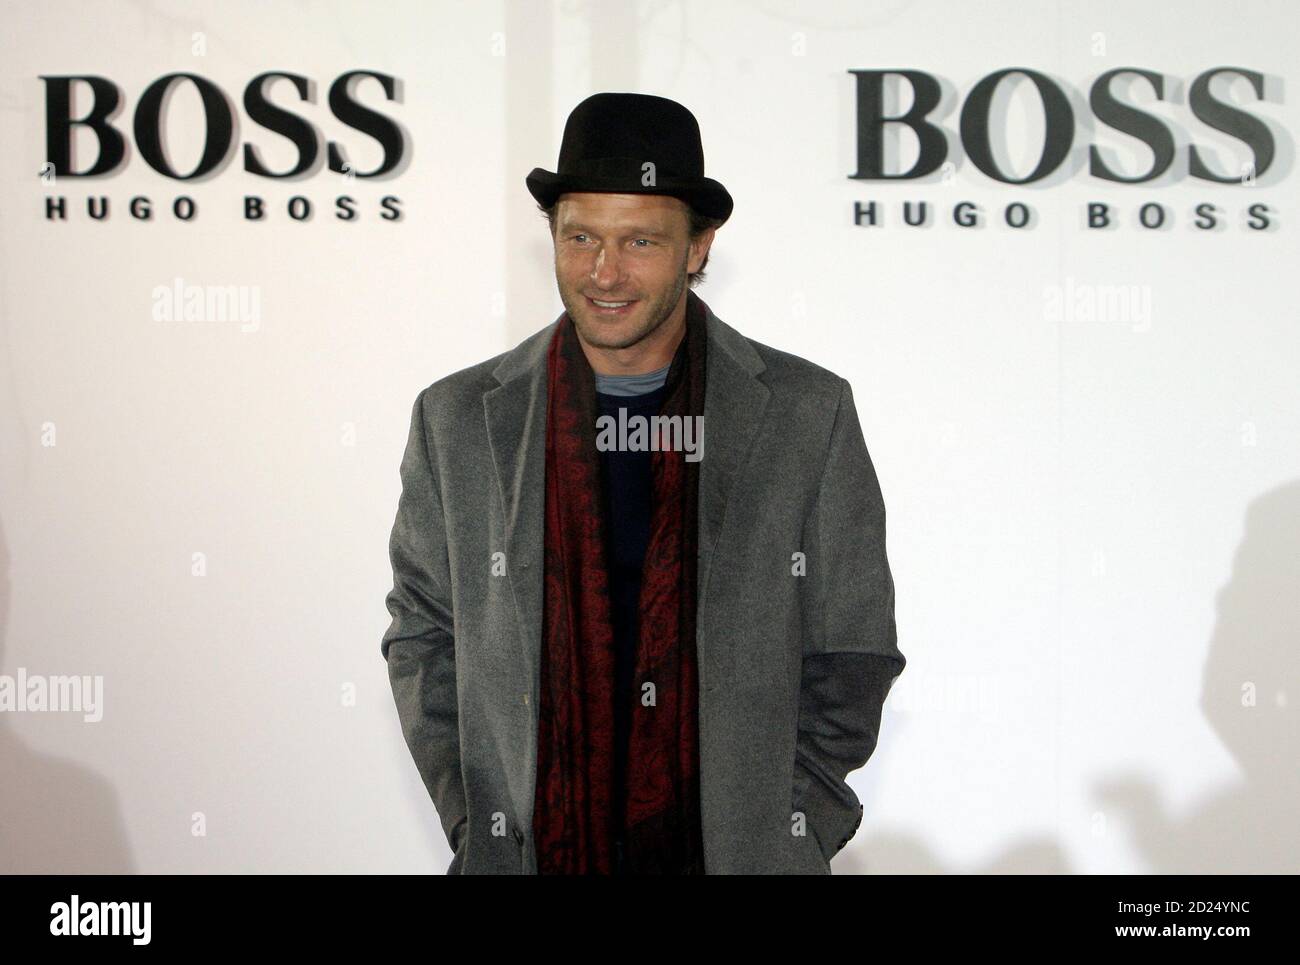 German actor Thomas Kretschmann poses on the red carpet for the Hugo Boss  'Black' fashion show at the 'Berlin Fashion Week 2009' in Berlin, January  28, 2009. REUTERS/Tobias Schwarz (GERMANY Stock Photo -